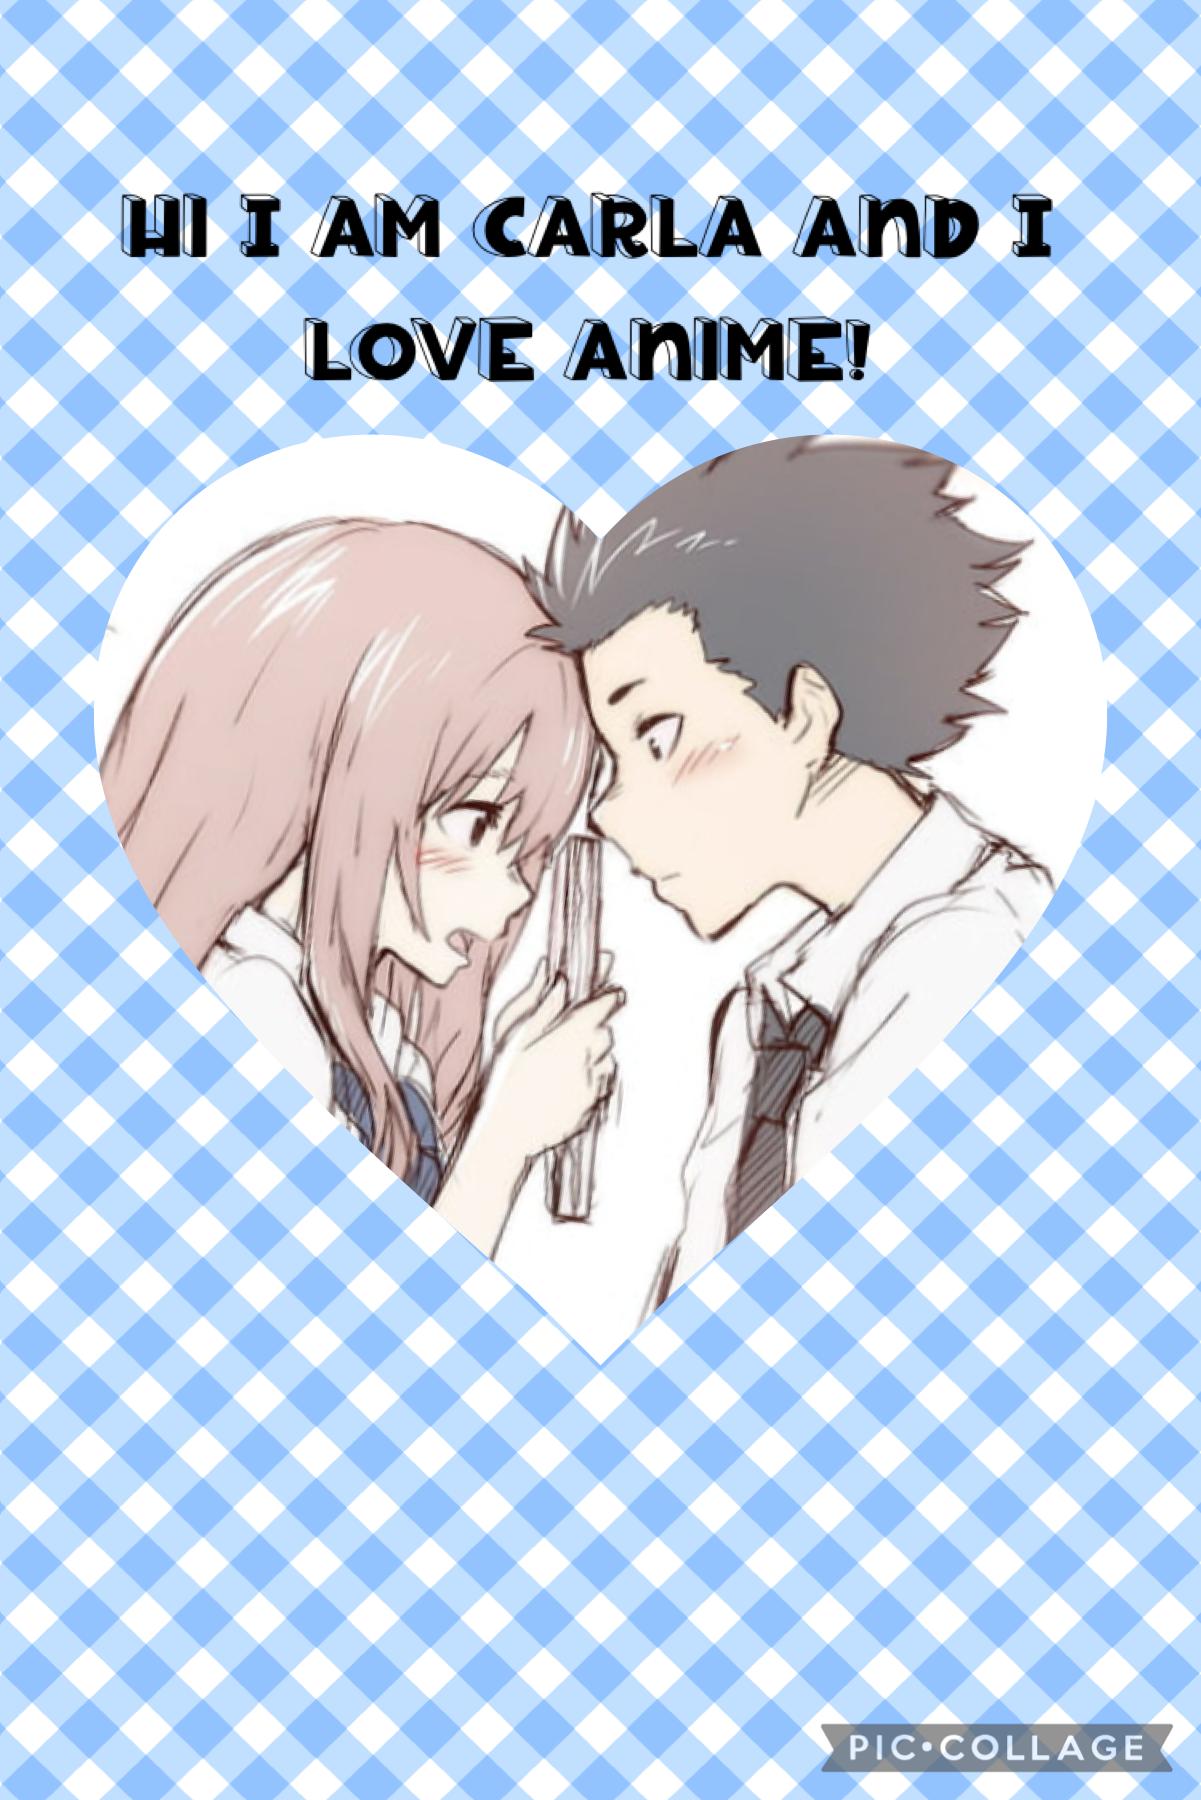 Hello,I am Carla and I love anime!

This is my first collage 

Silent voice fan art 

Carlablocks 